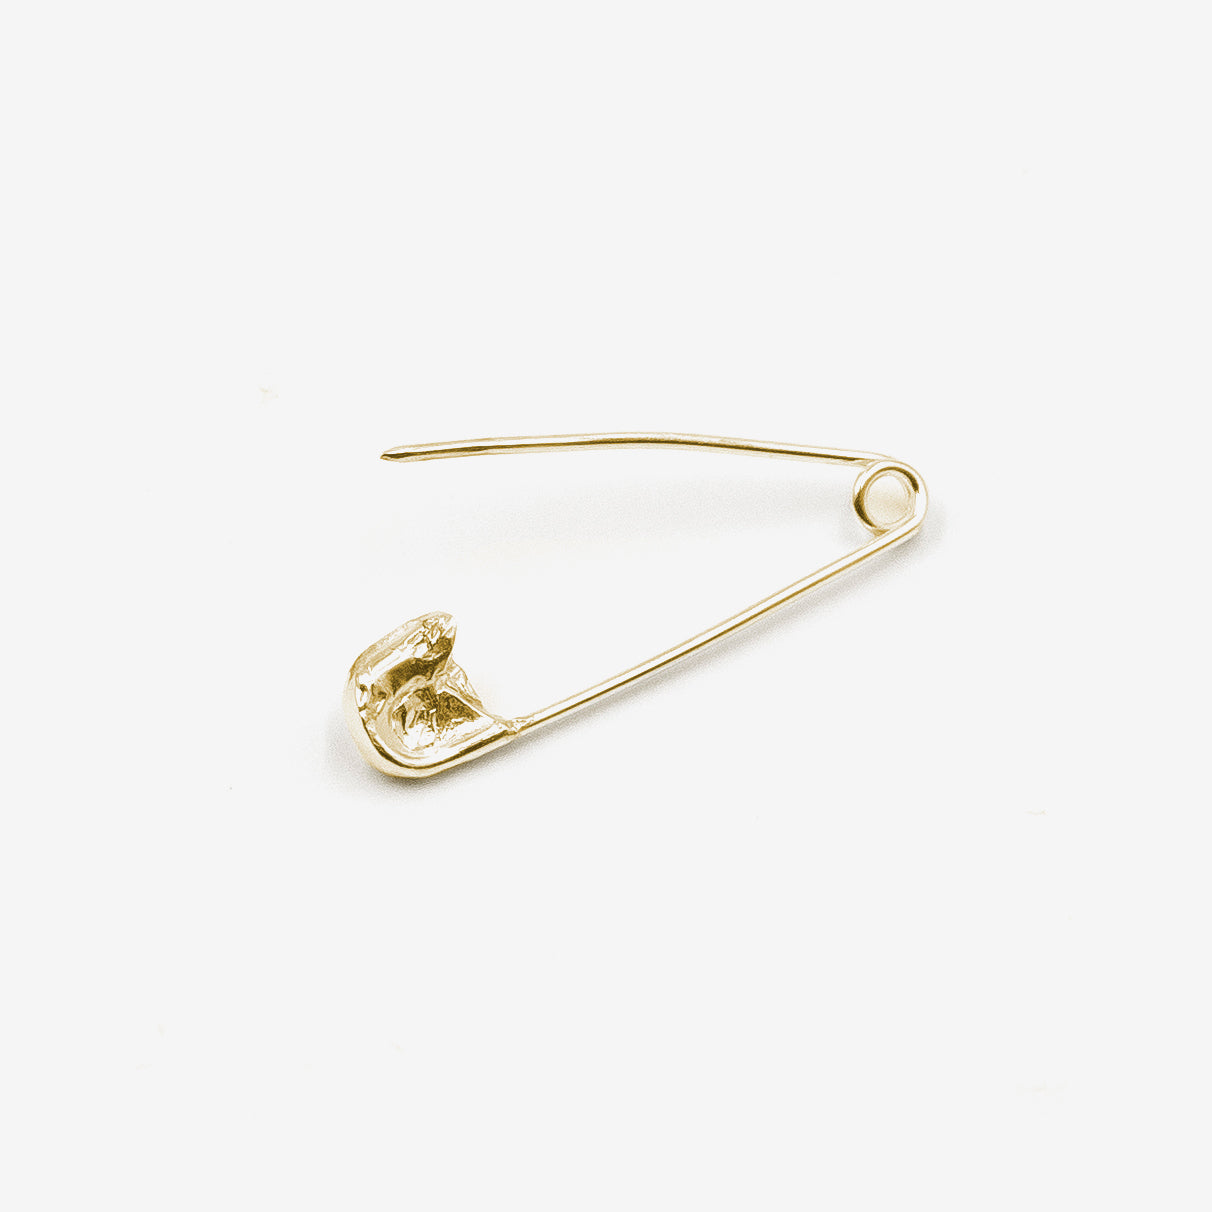 Safetypin Earring - Gold